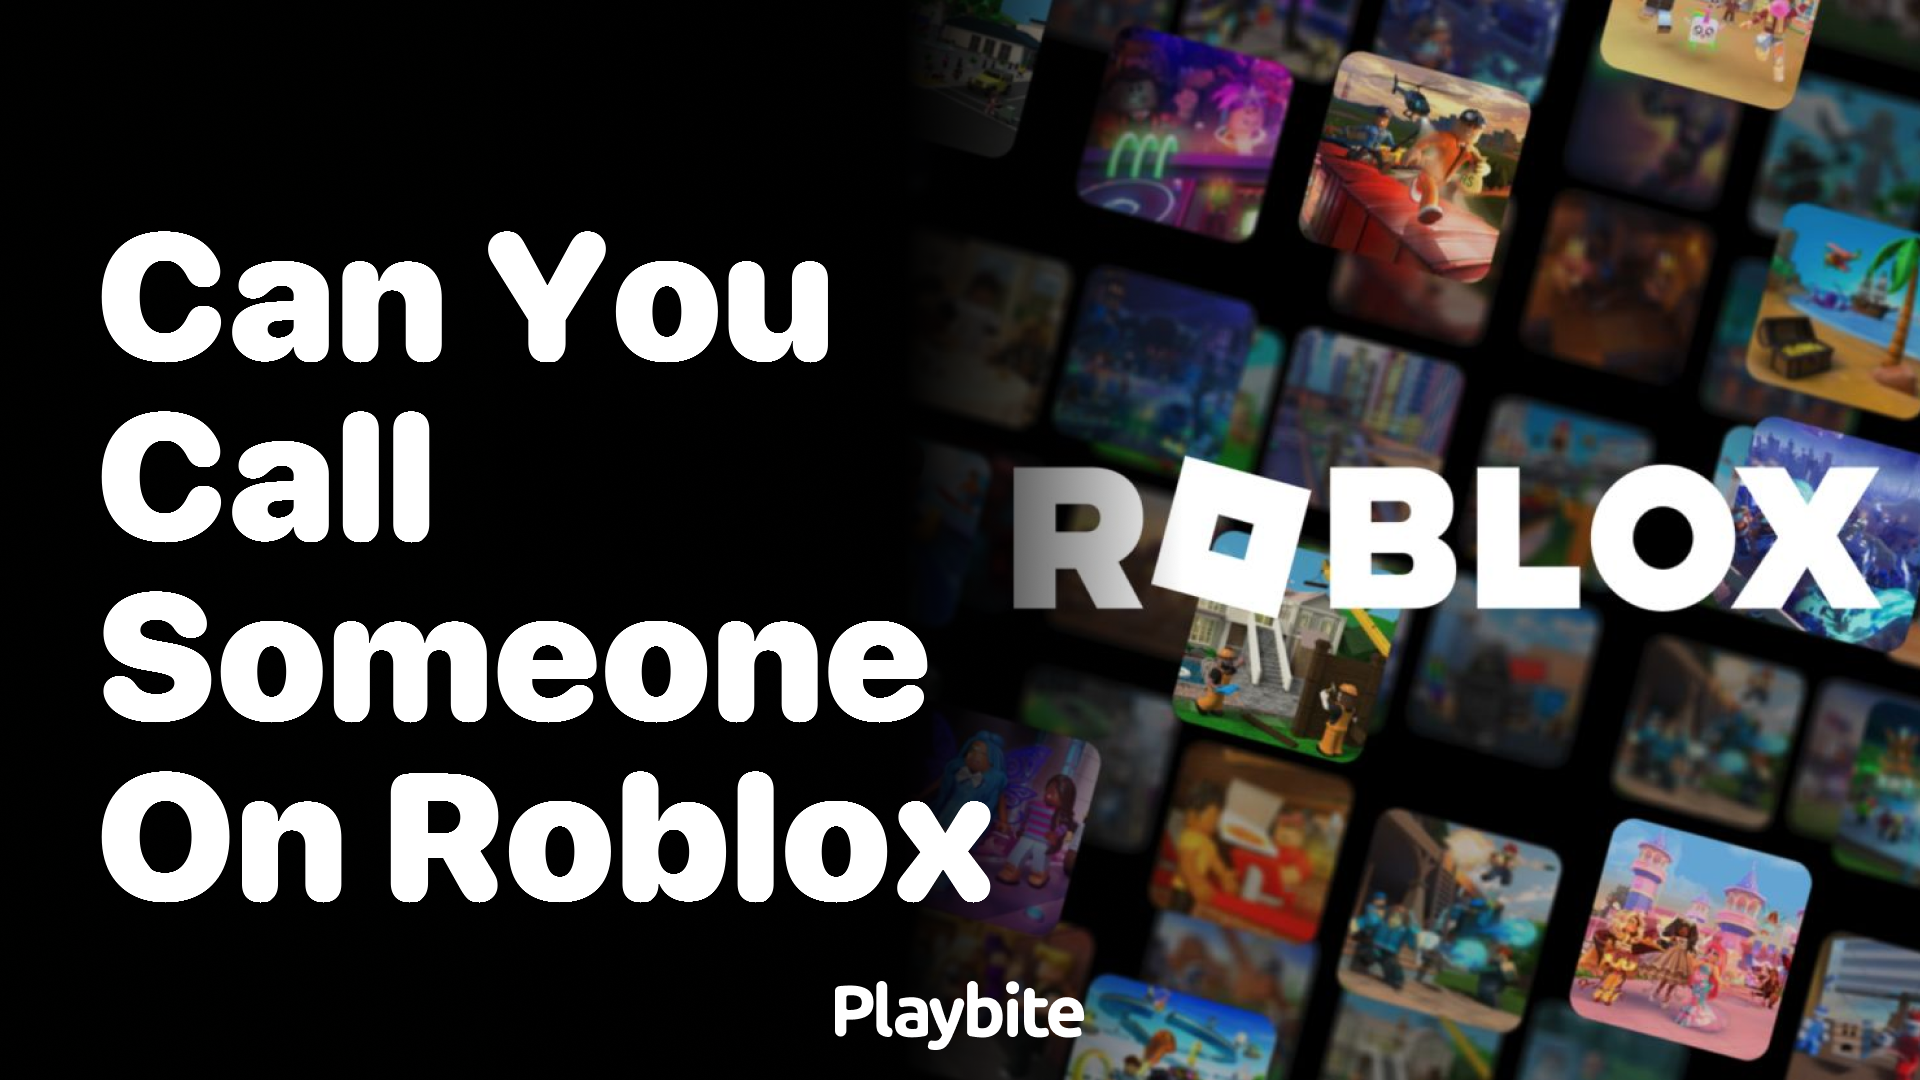 Can You Call Someone on Roblox? Unwrapping the Communication Features